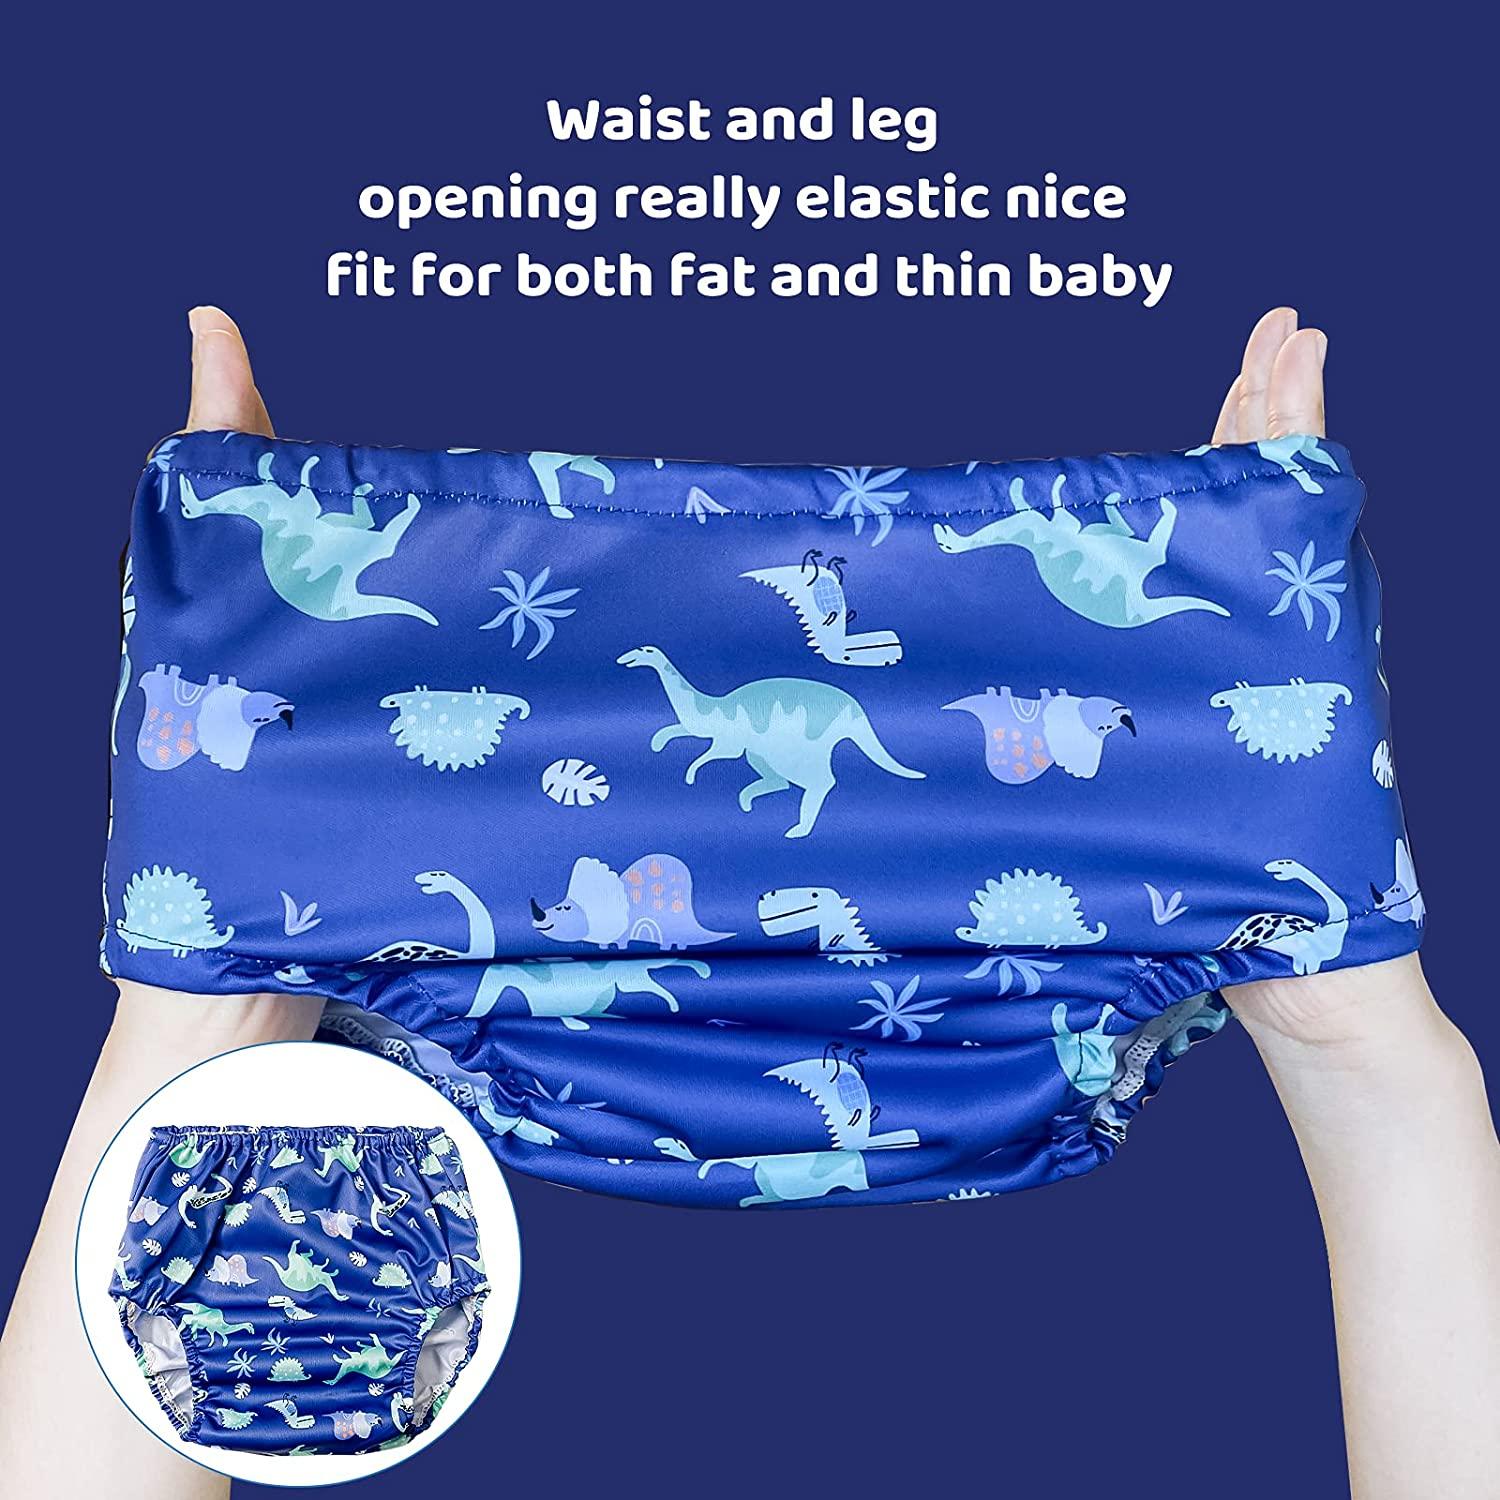 Potty Training Underwear for Boys, Toddler Rubber Swim Diaper Cover,  Plastic Pants for Toddlers Training Pants, Training Underwear for Boys 3T